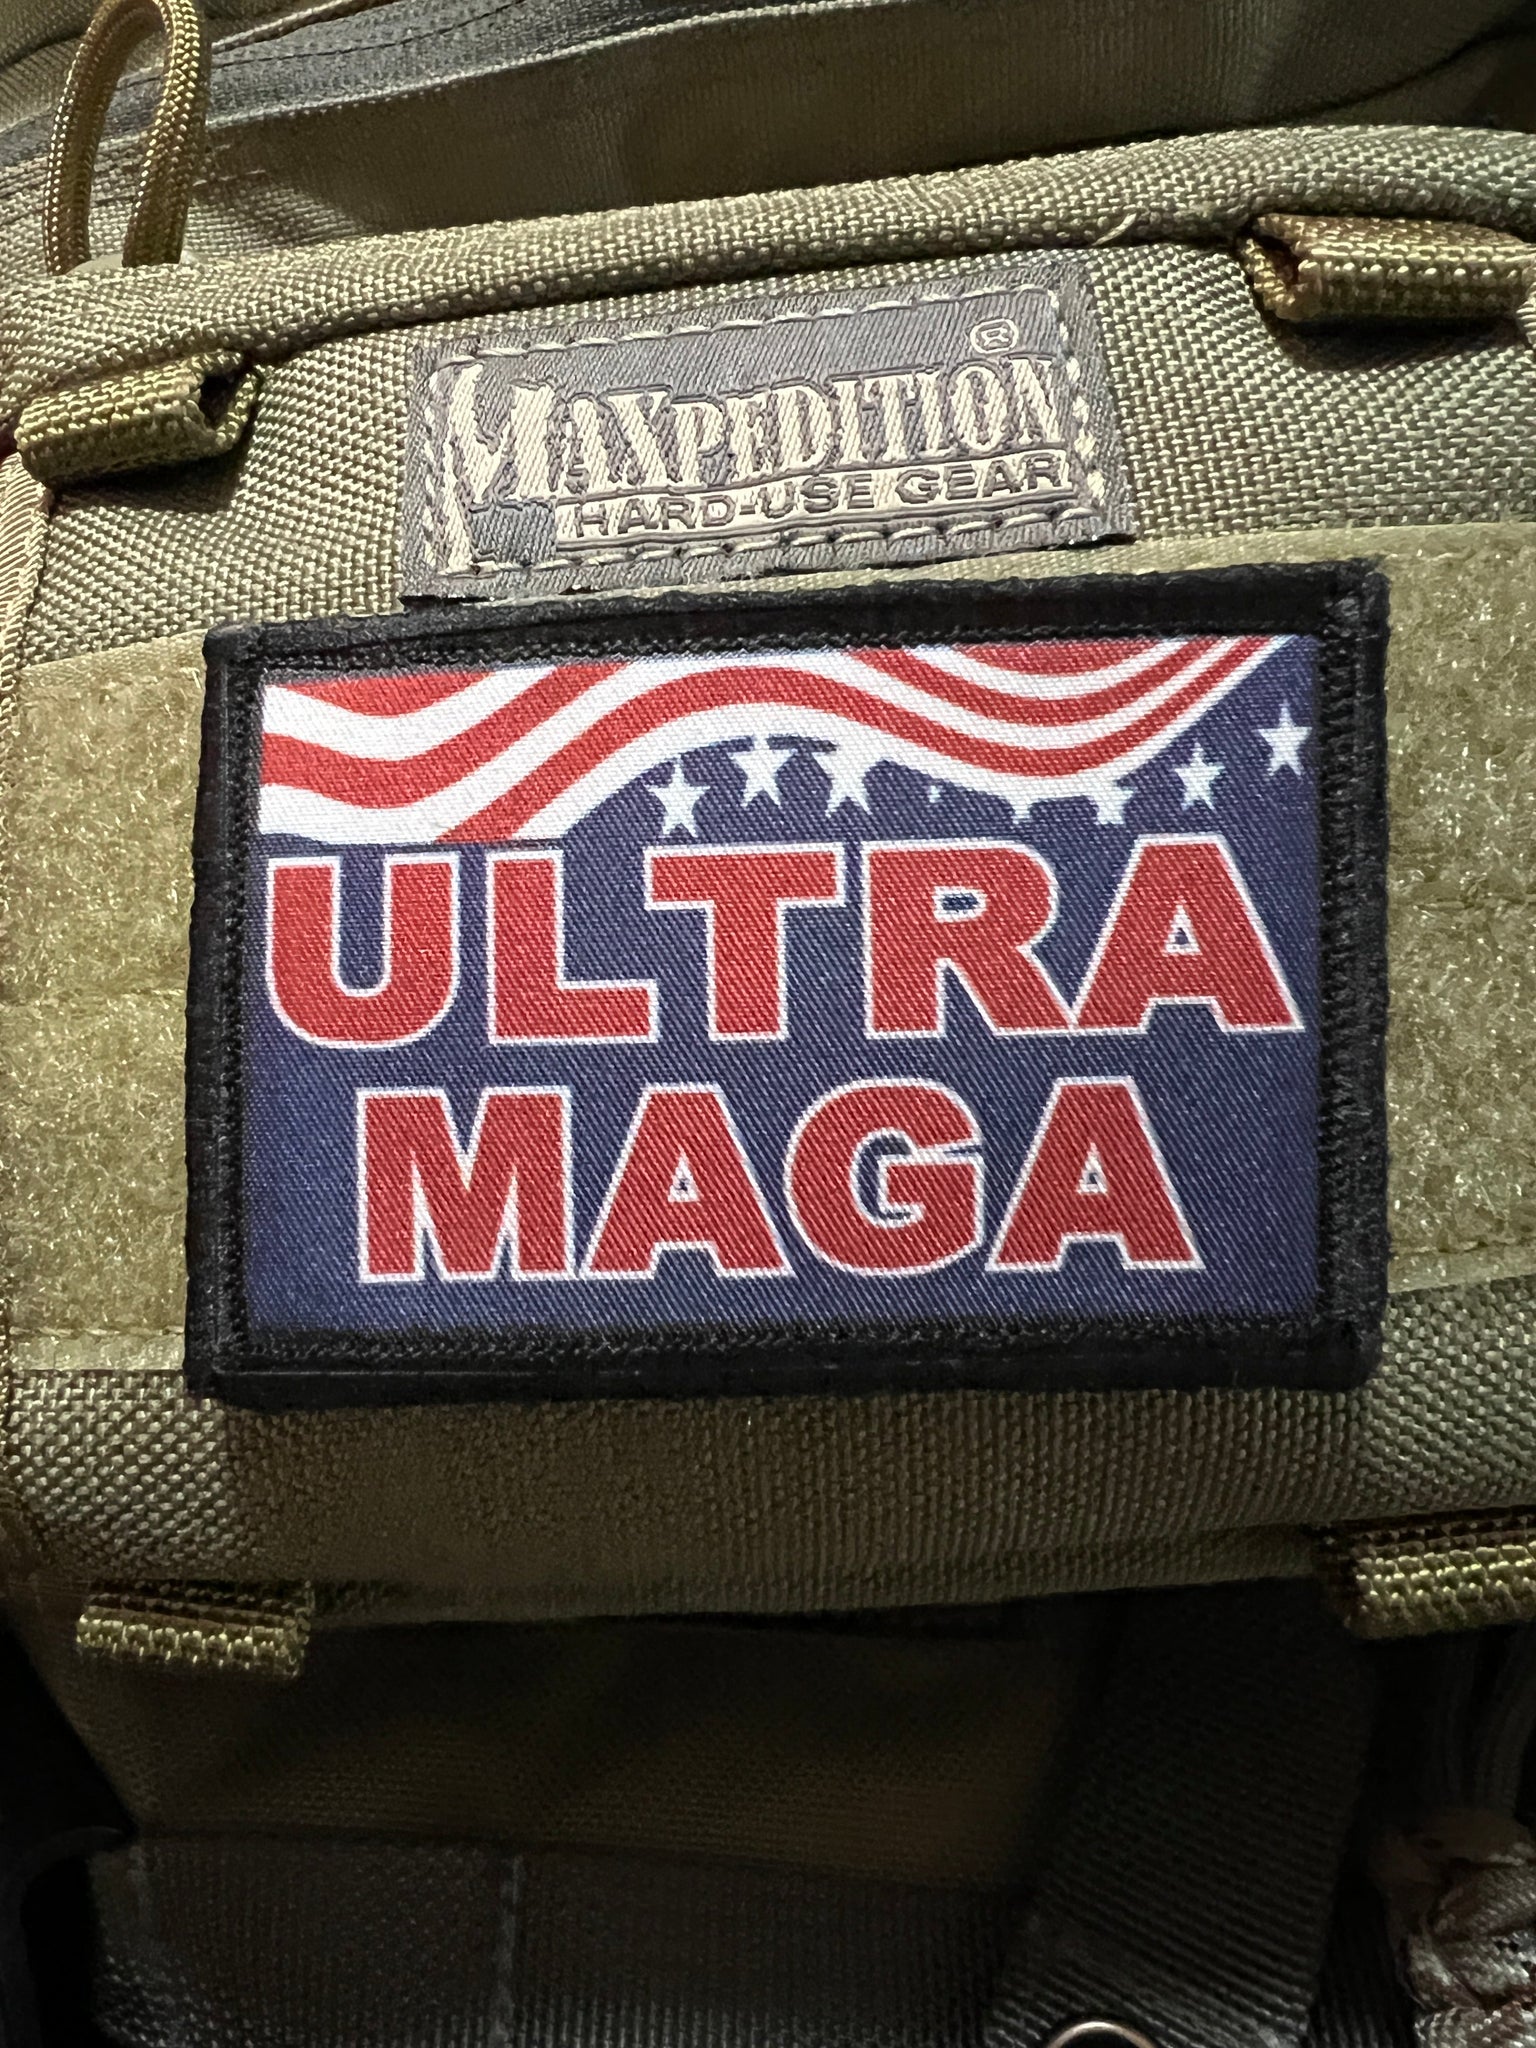 ULTRA MAGA Full Color Morale Patch Morale Patches Redheaded T Shirts 